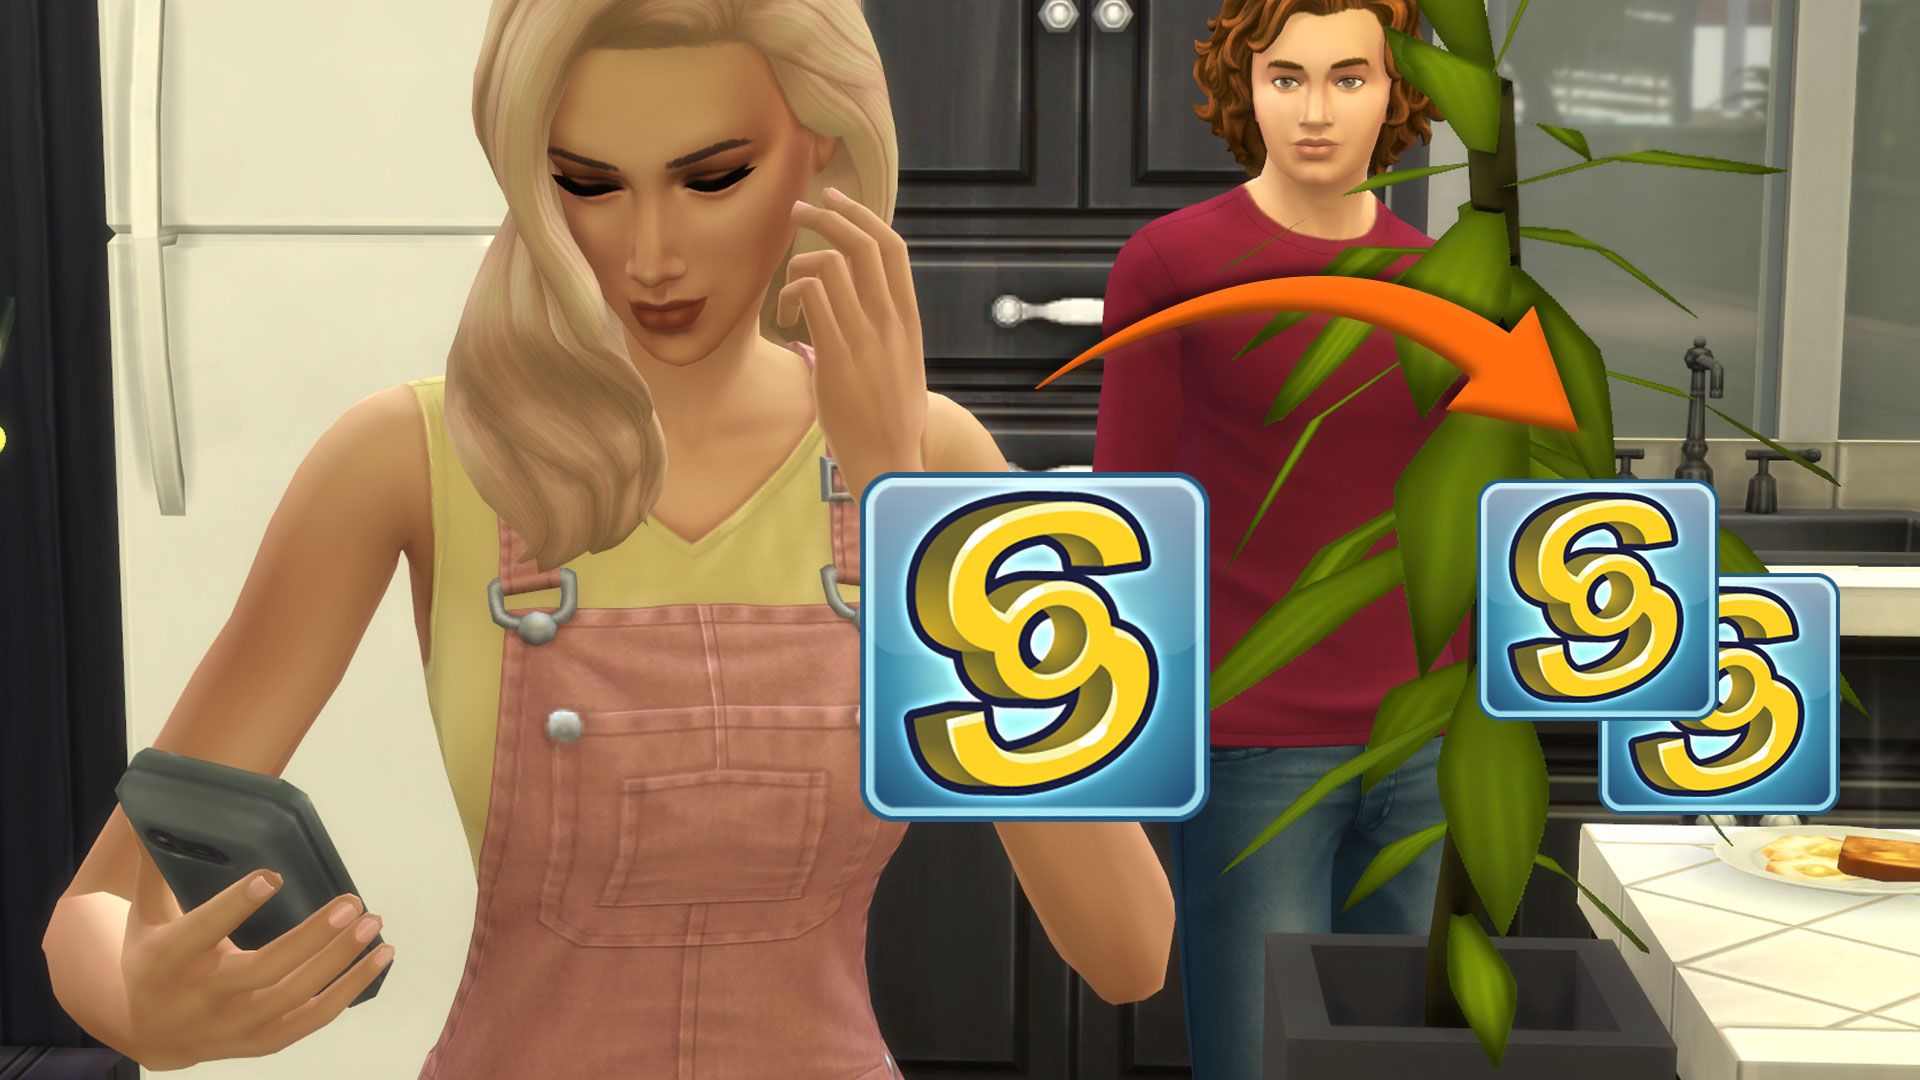 A female Sim is using her phone, a male Sim stares at her from a few steps behind. The symbol for the Simoleon is overlapping the scene in the form of an icon while an arrow points to the same symbol, now smaller and duplicated.